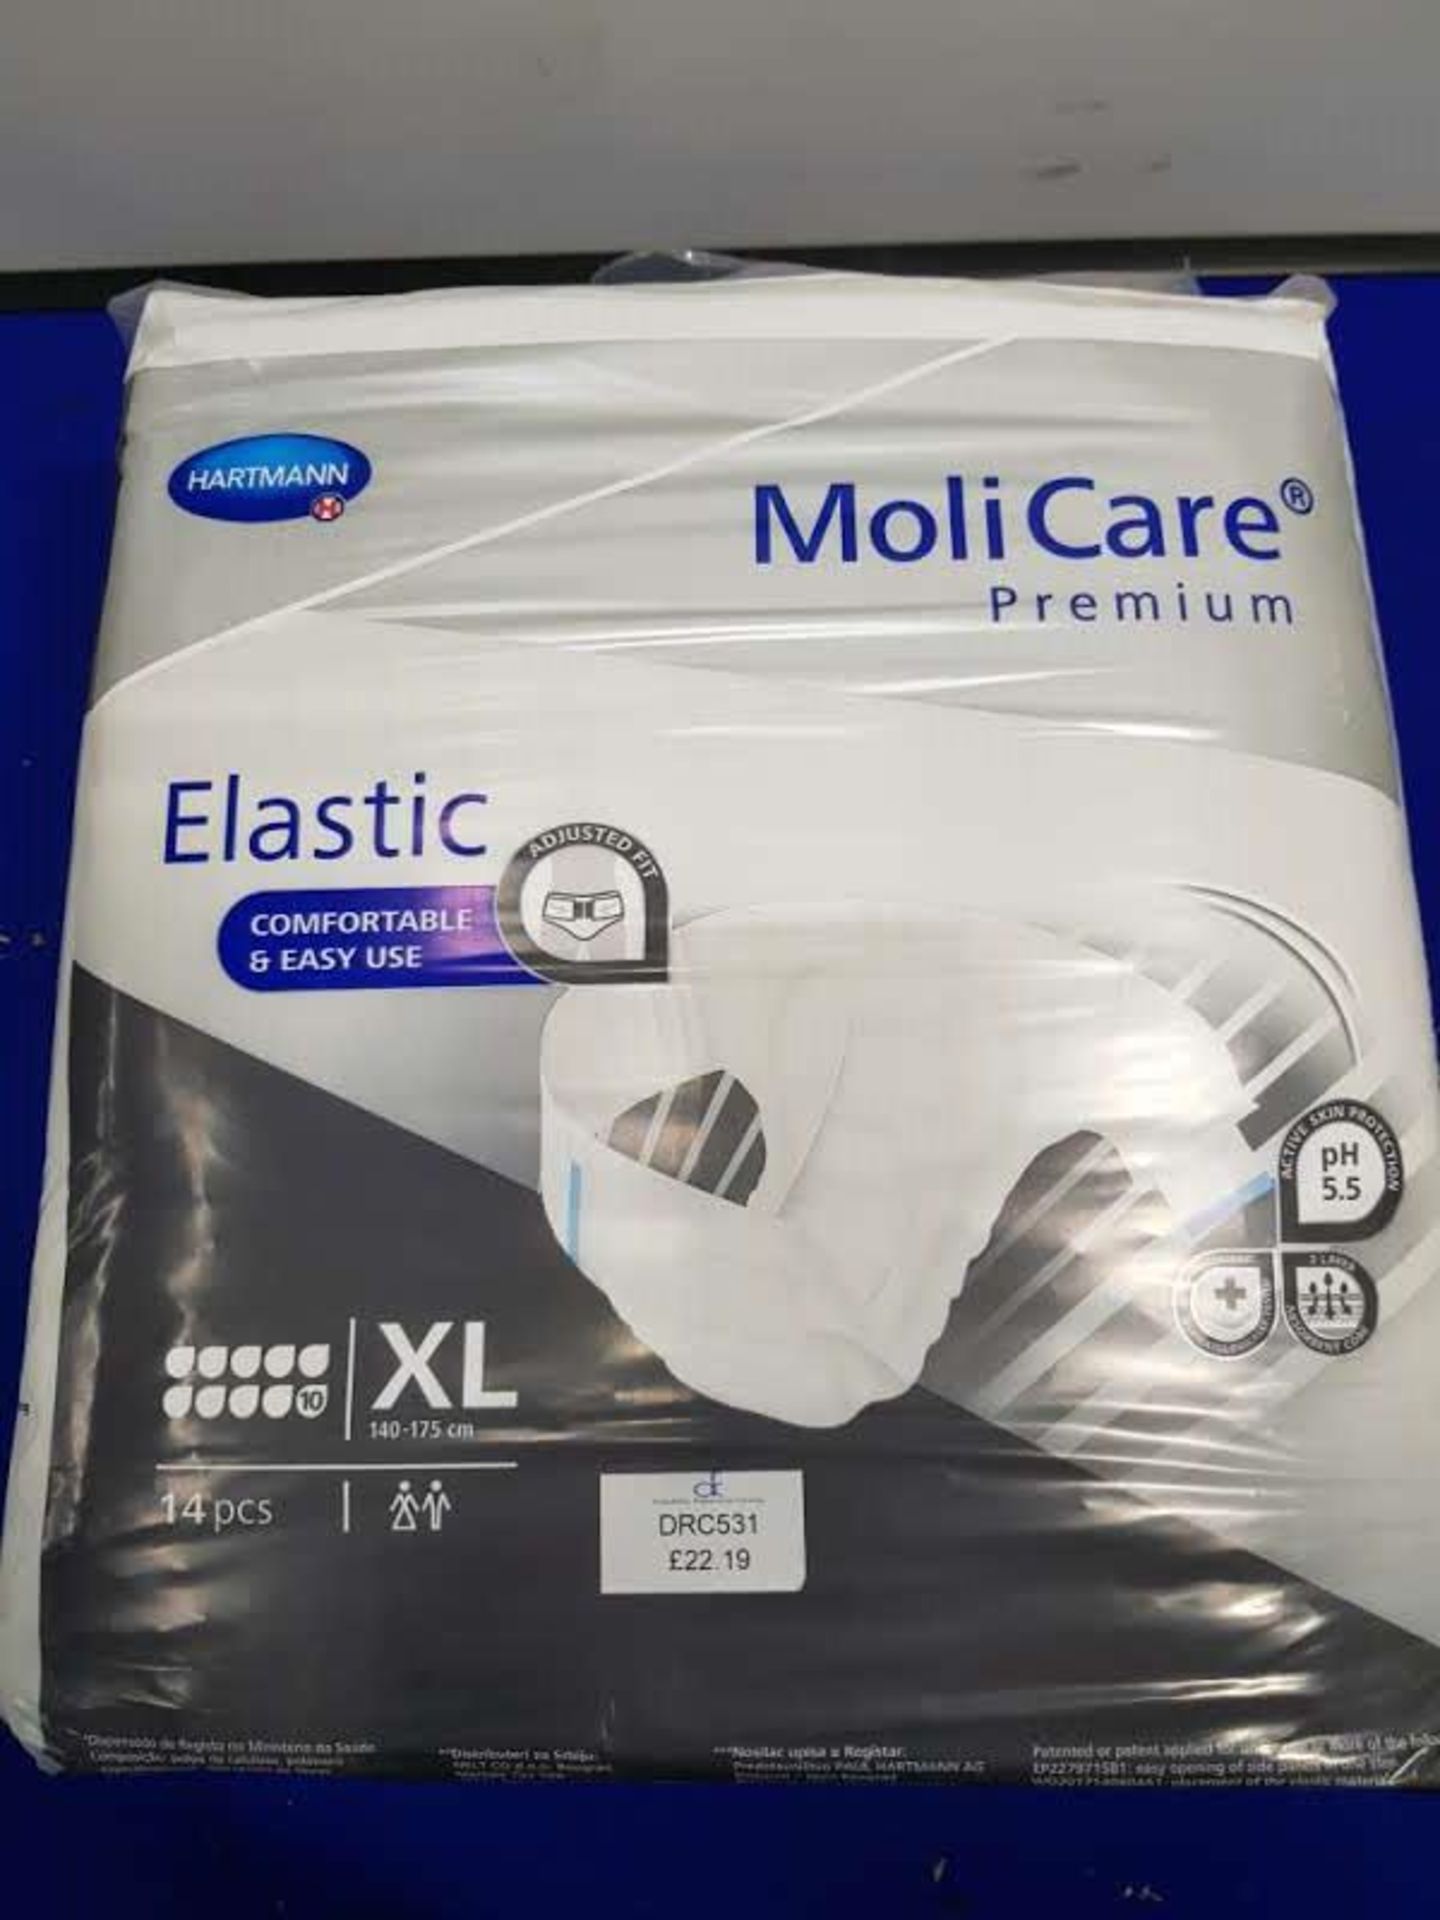 2x Packs Molicare Incontinence Briefs With Elastic Panels - Image 2 of 3